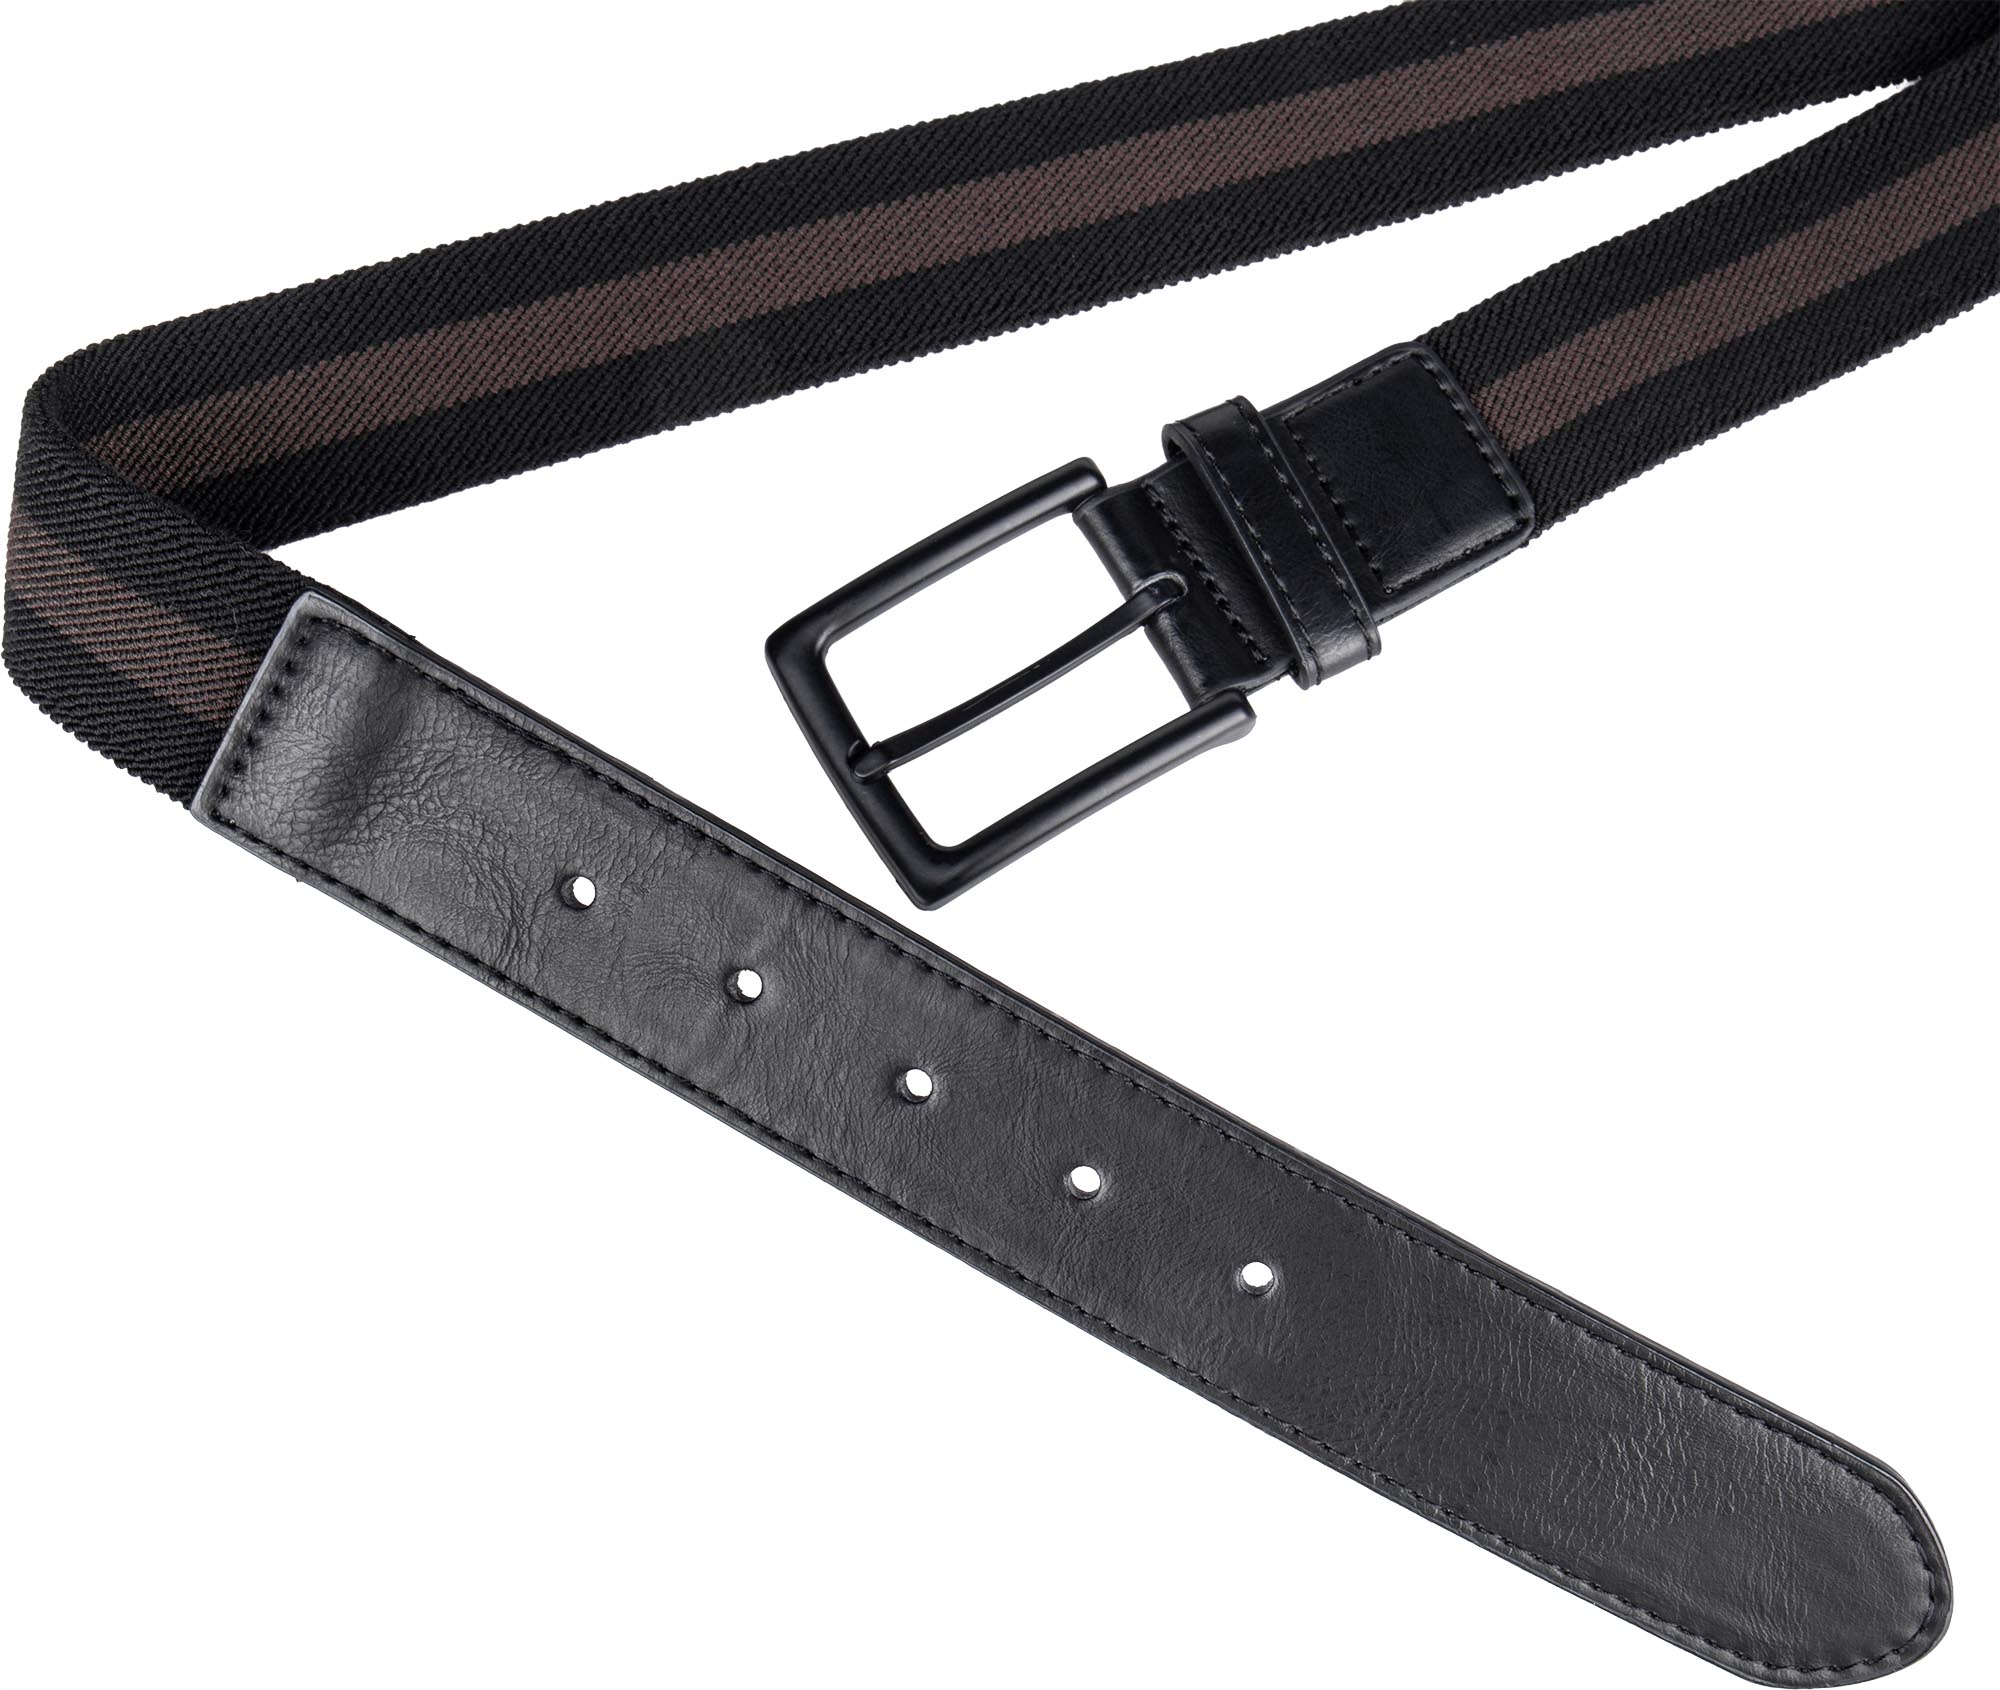 Elastic belt with a metal buckle